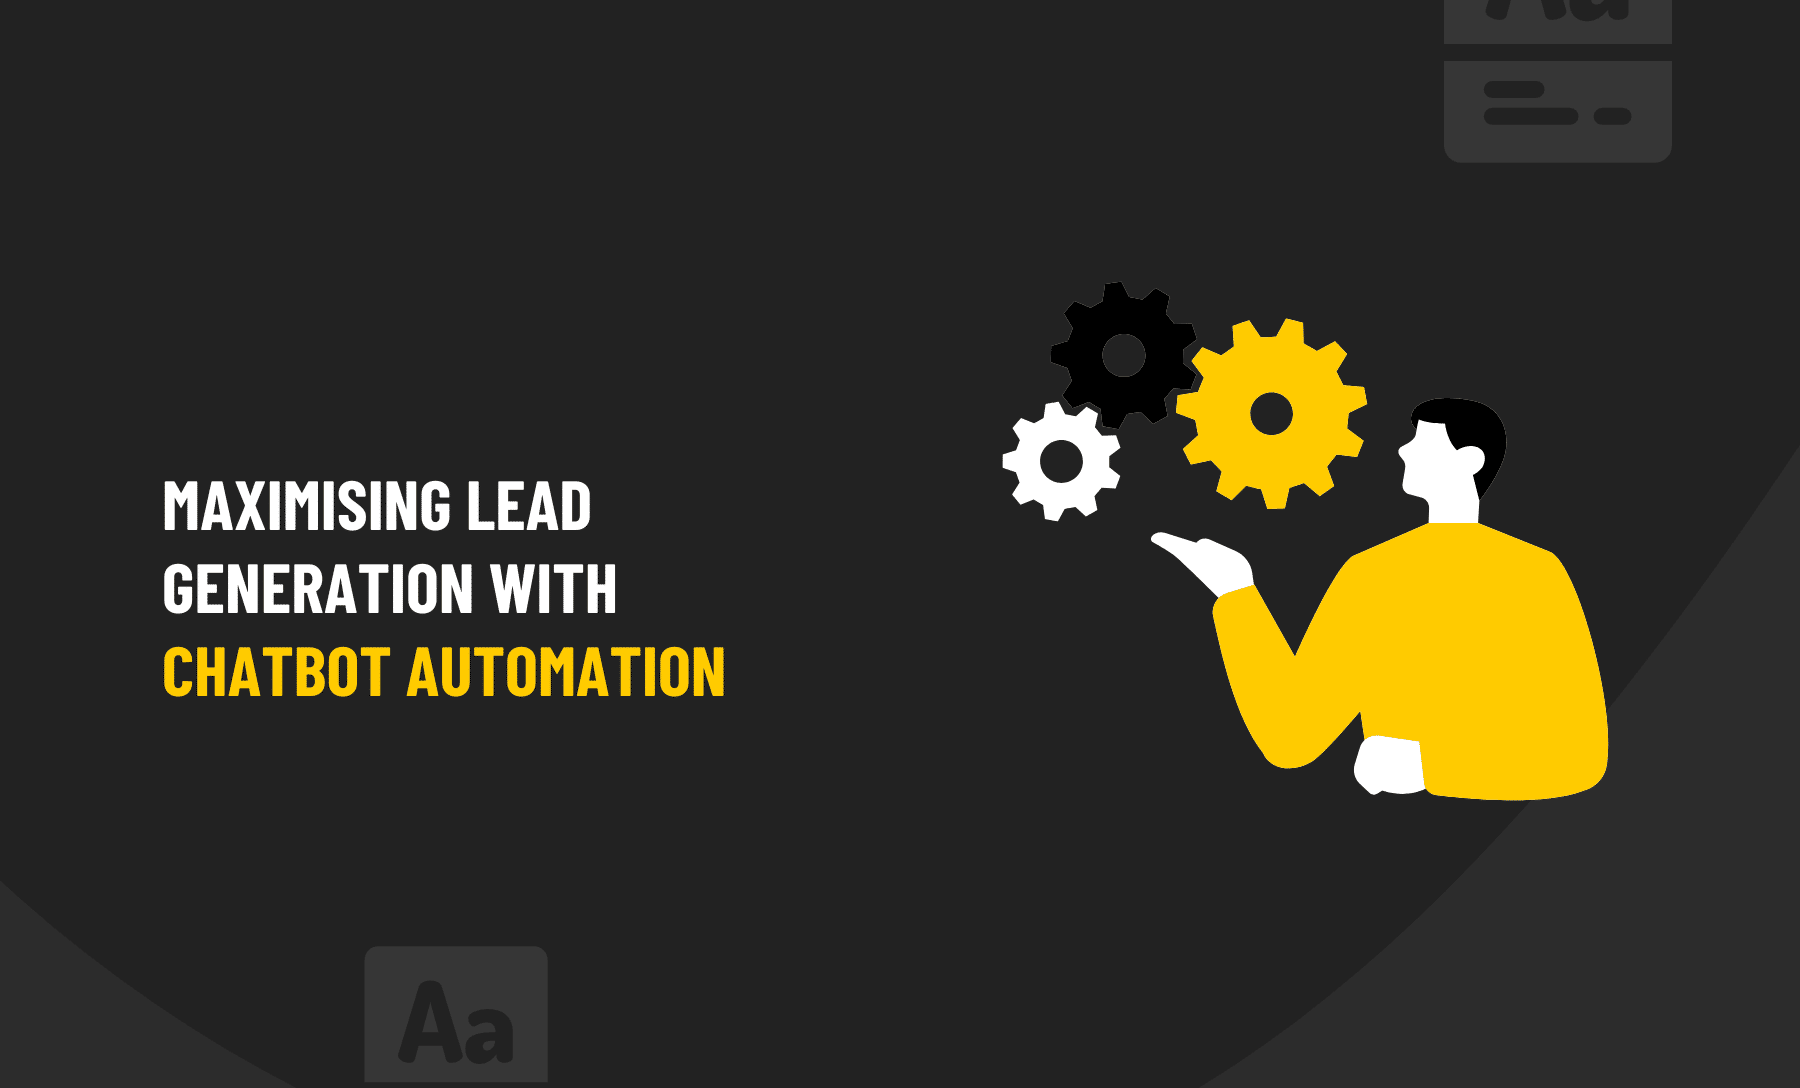 Maximizing lead generation with chatbot automation